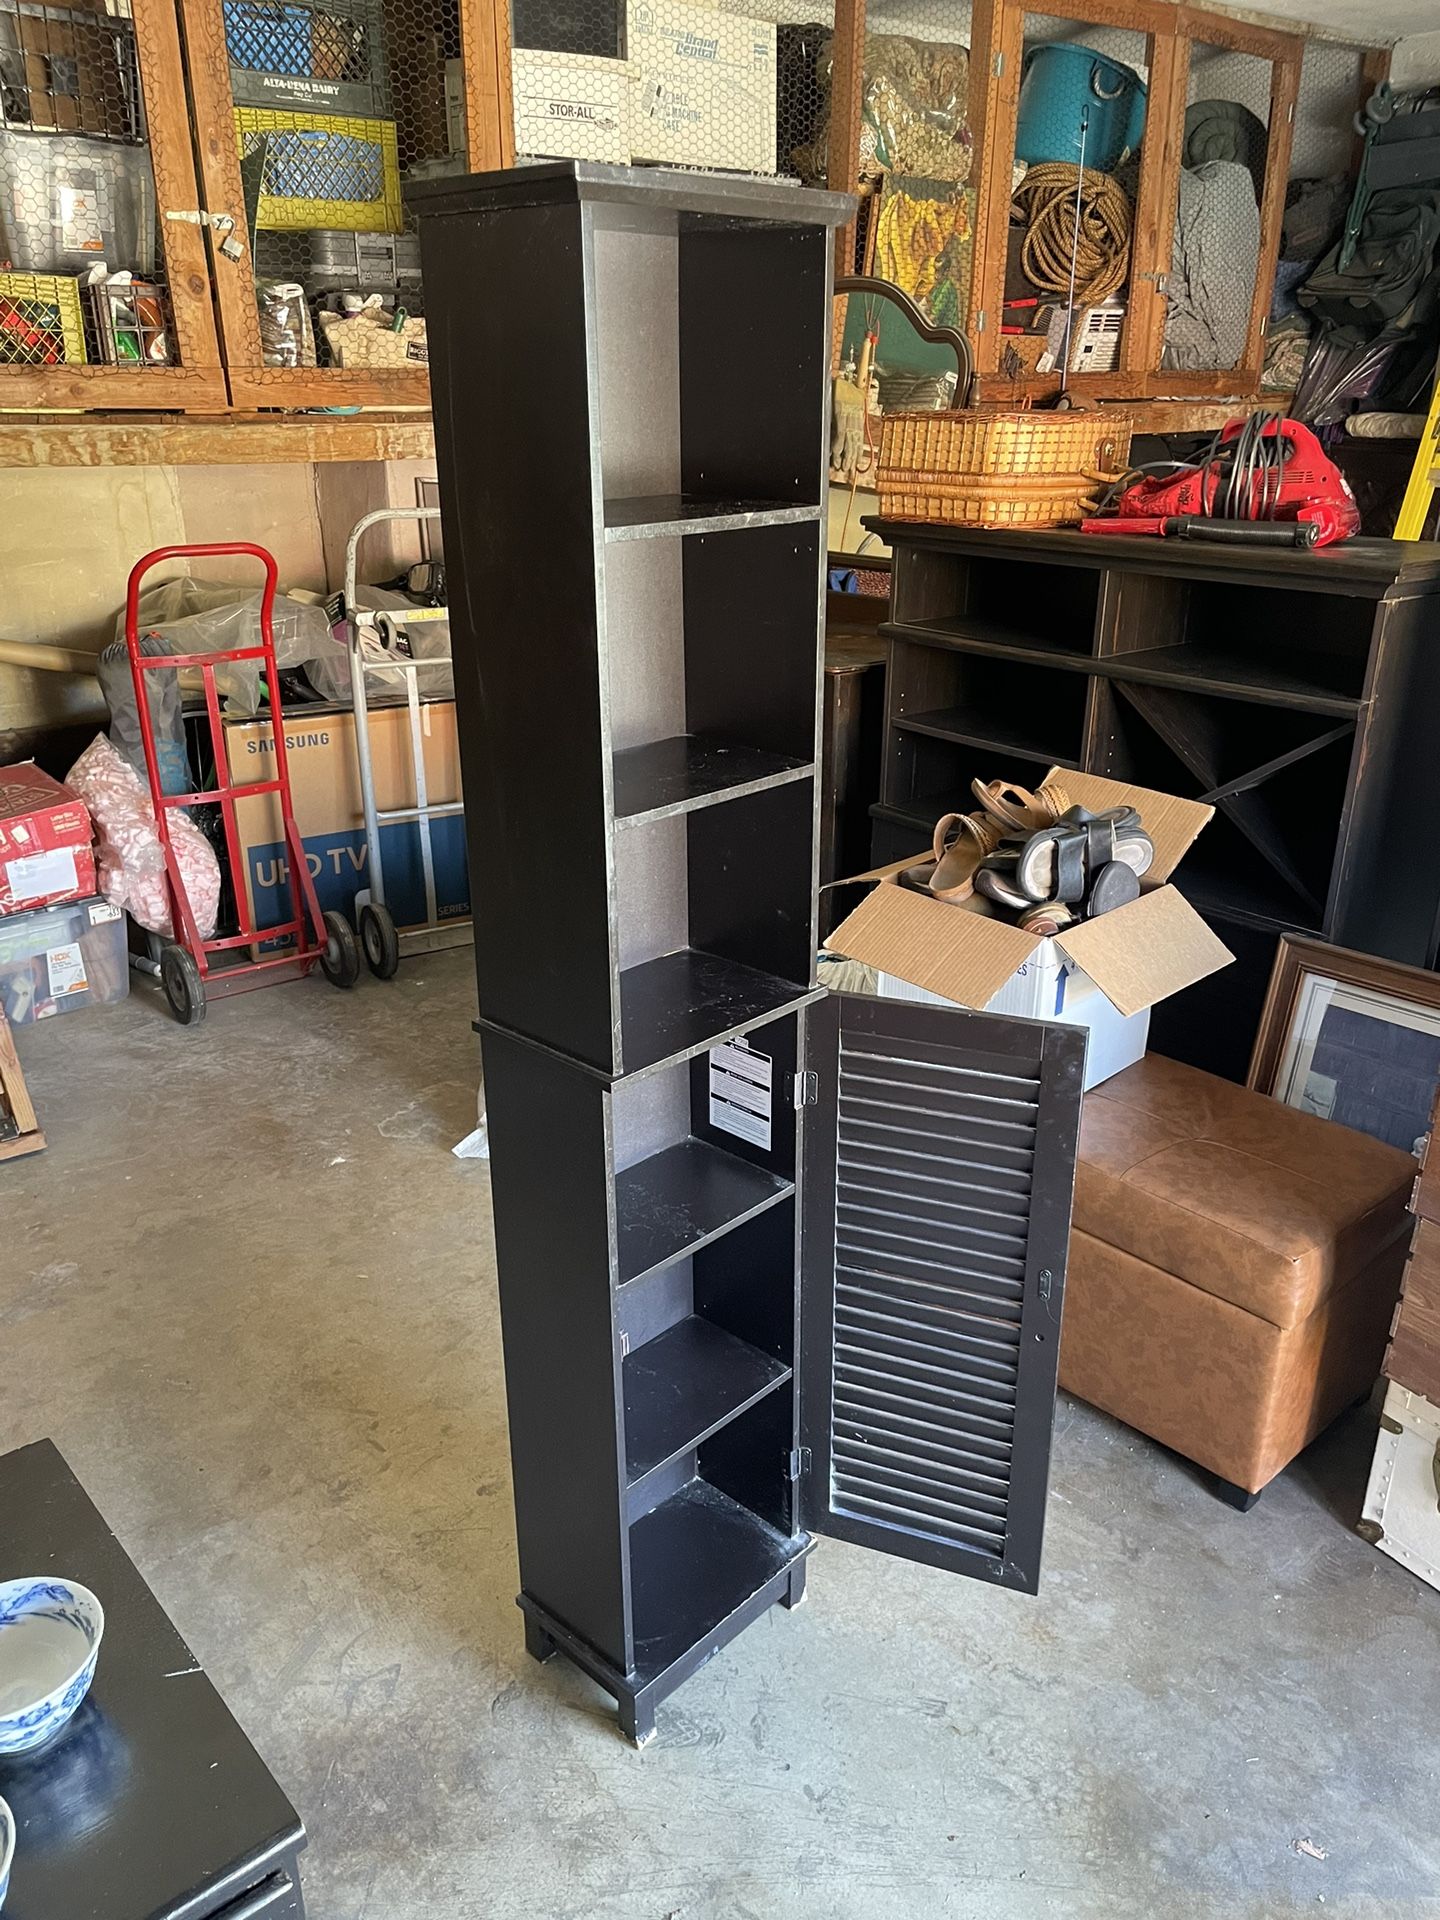 Shelf And Cabinet For Storage $60